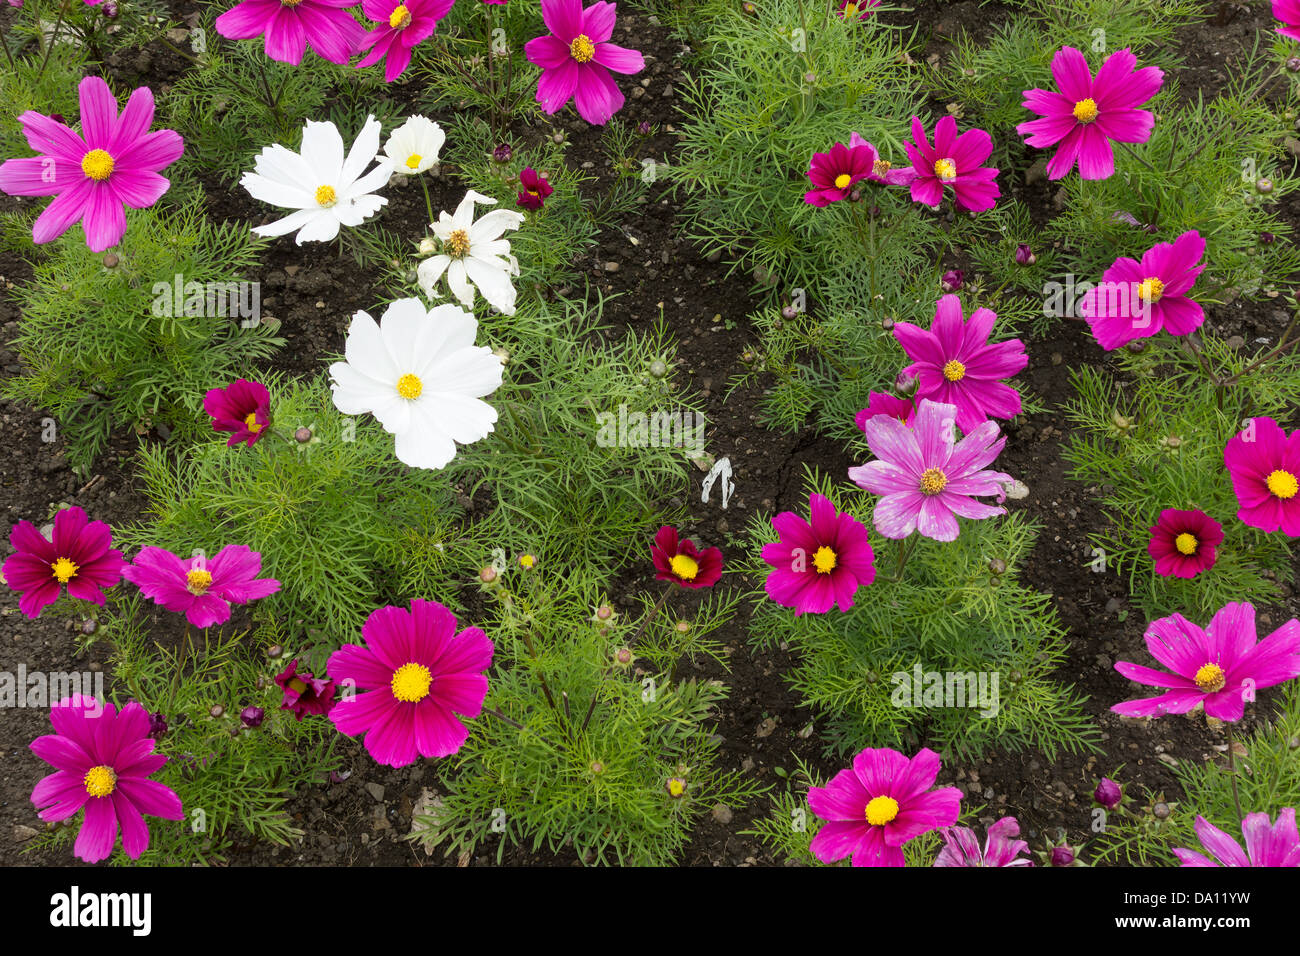 Cosmos an annual flower grown by gardeners for their showy flowers Stock Photo